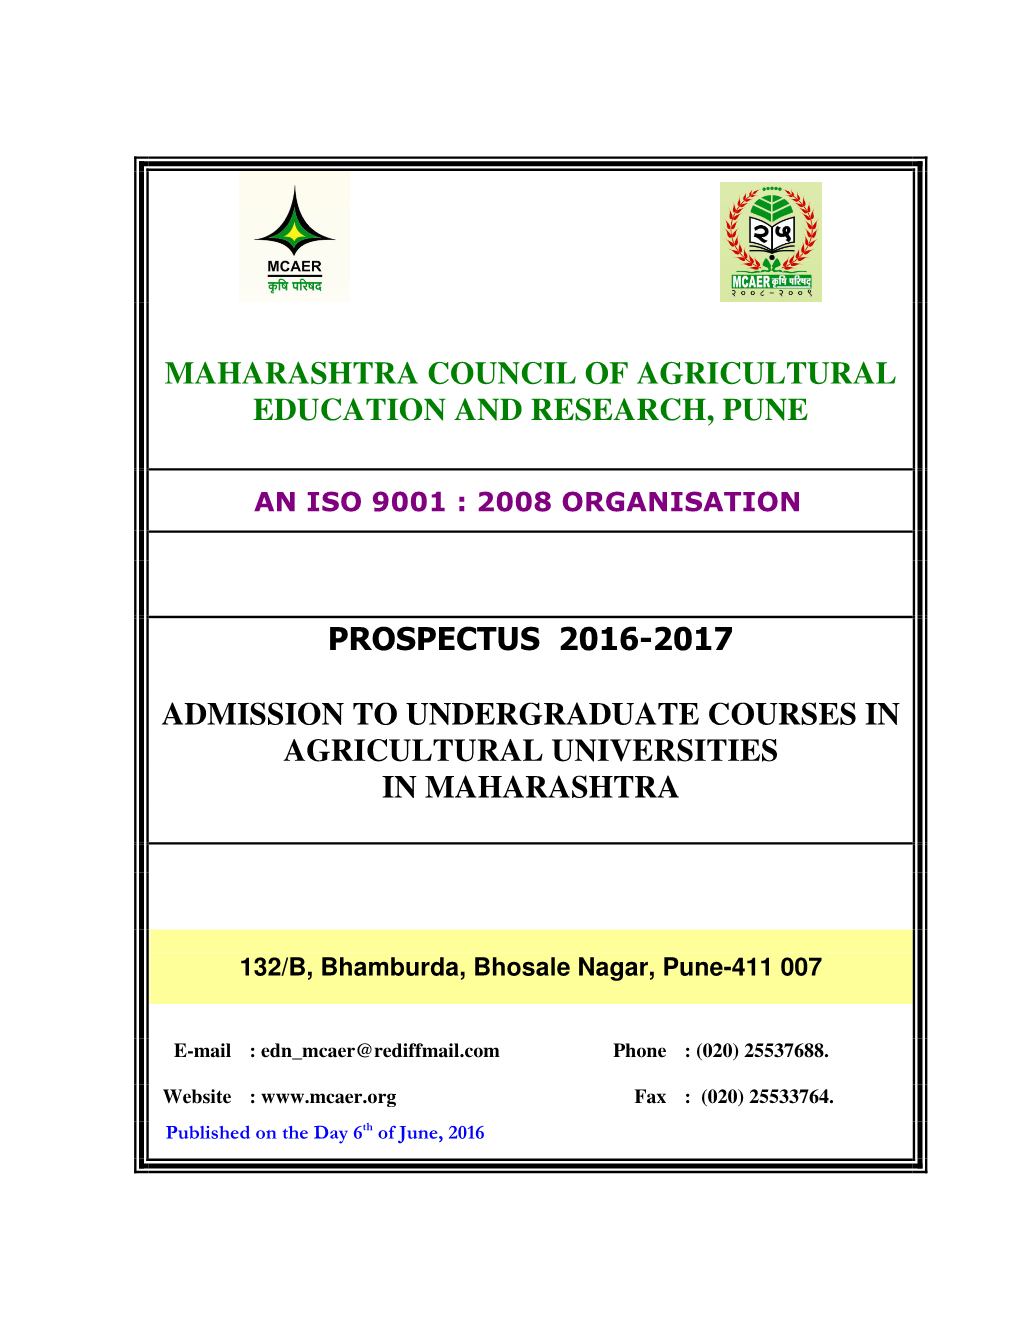 Maharashtra Council of Agricultural Education and Research, Pune